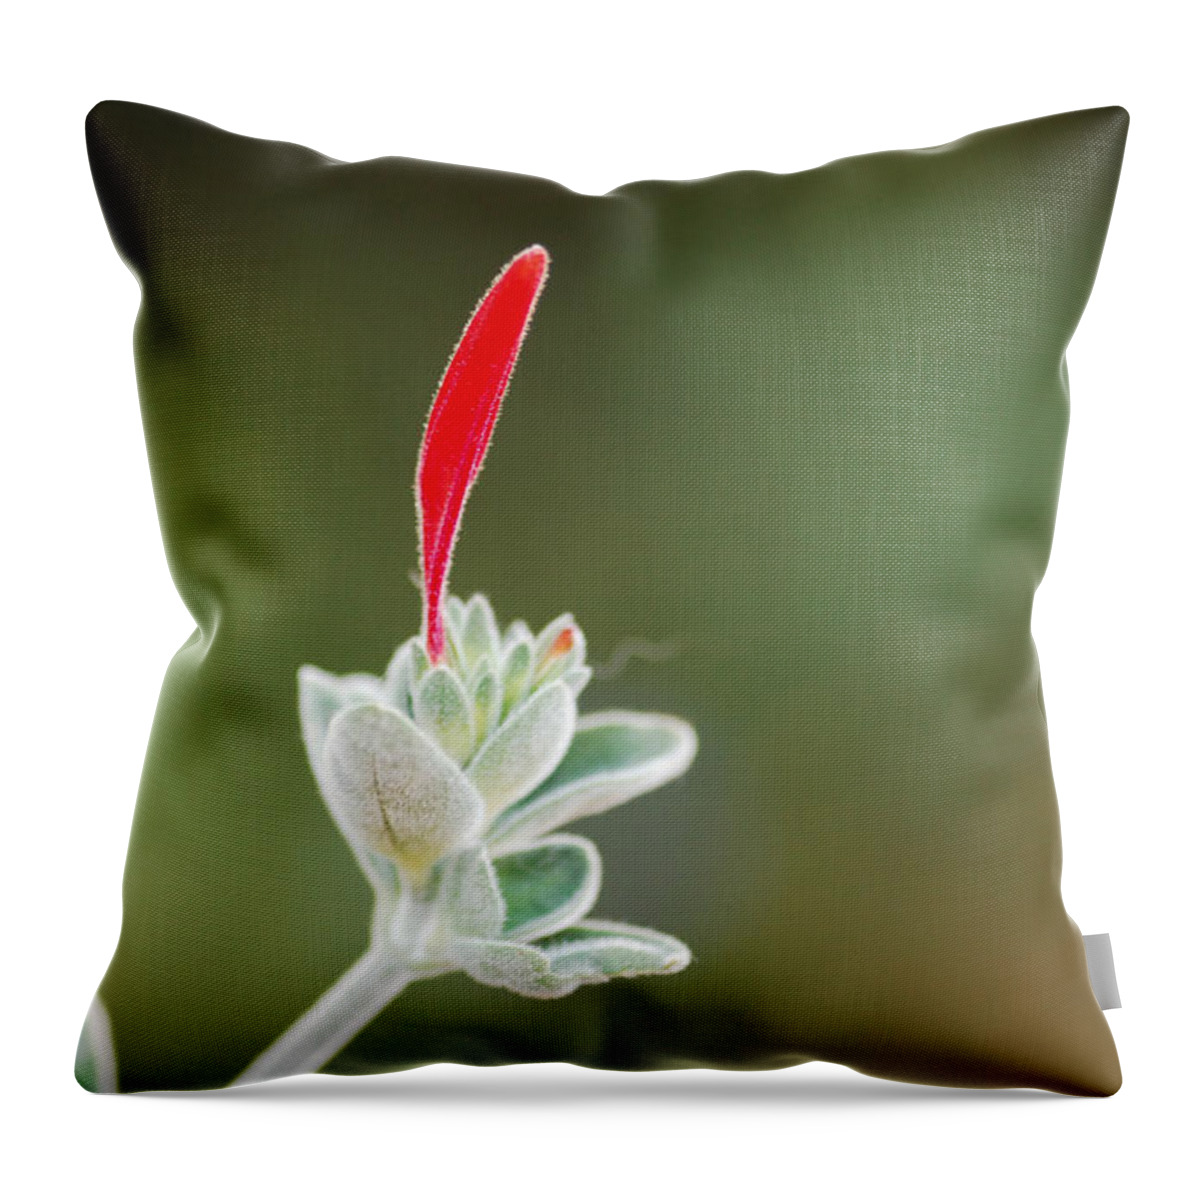 Floral Throw Pillow featuring the photograph Just A Moment by Donna Blackhall